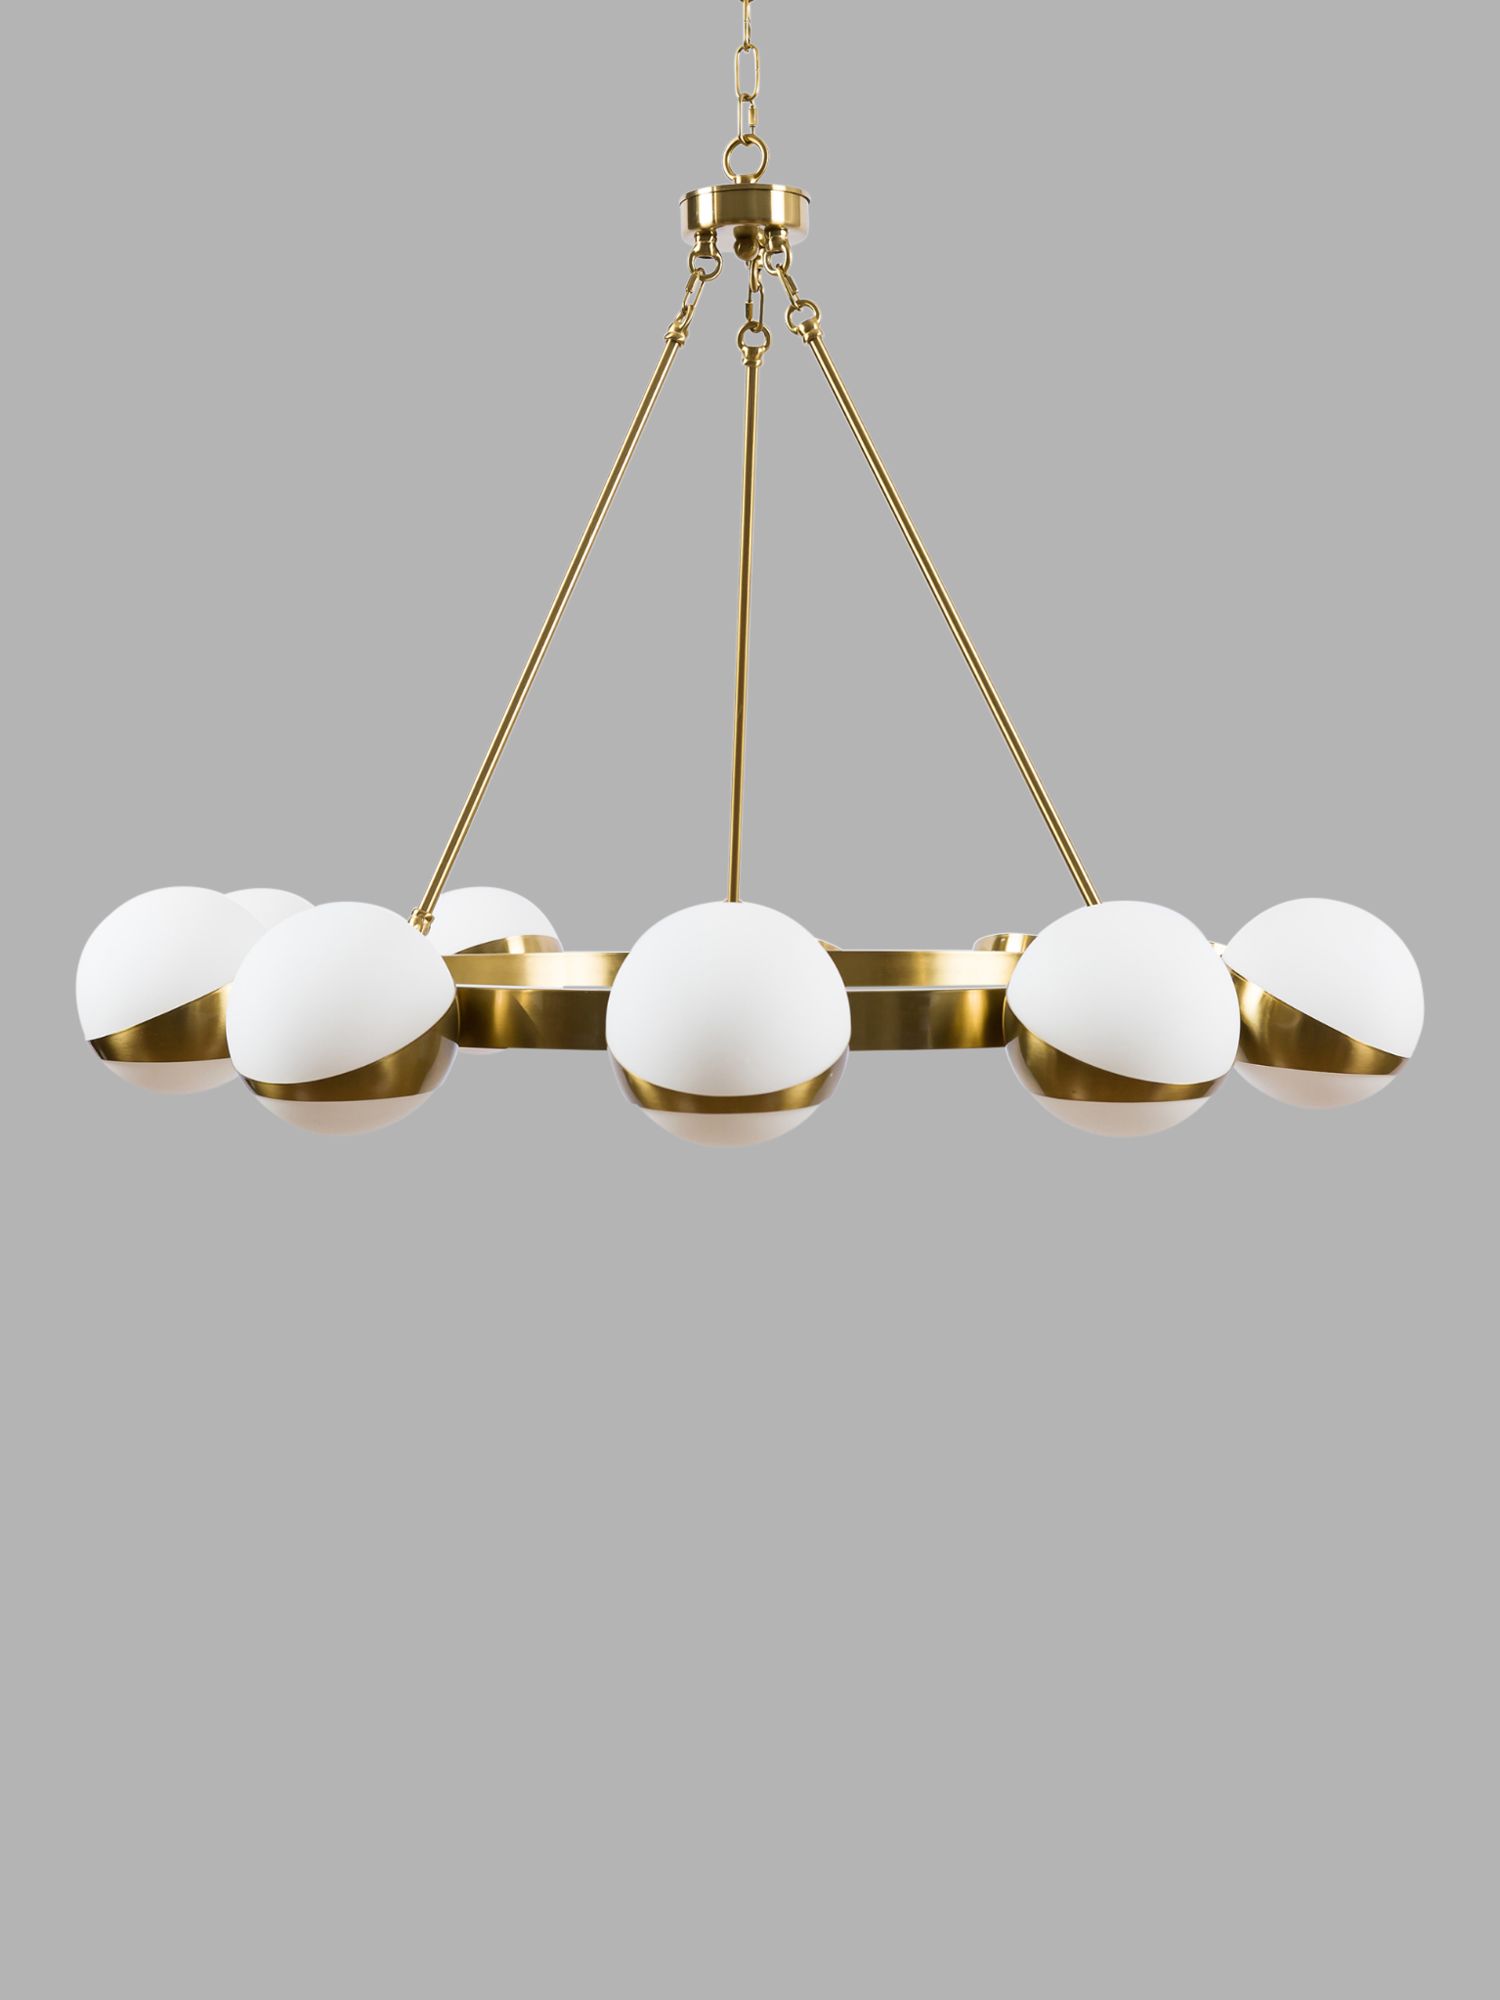 Pure White Lines Luna 10 Arm Ceiling Light, Gold/White